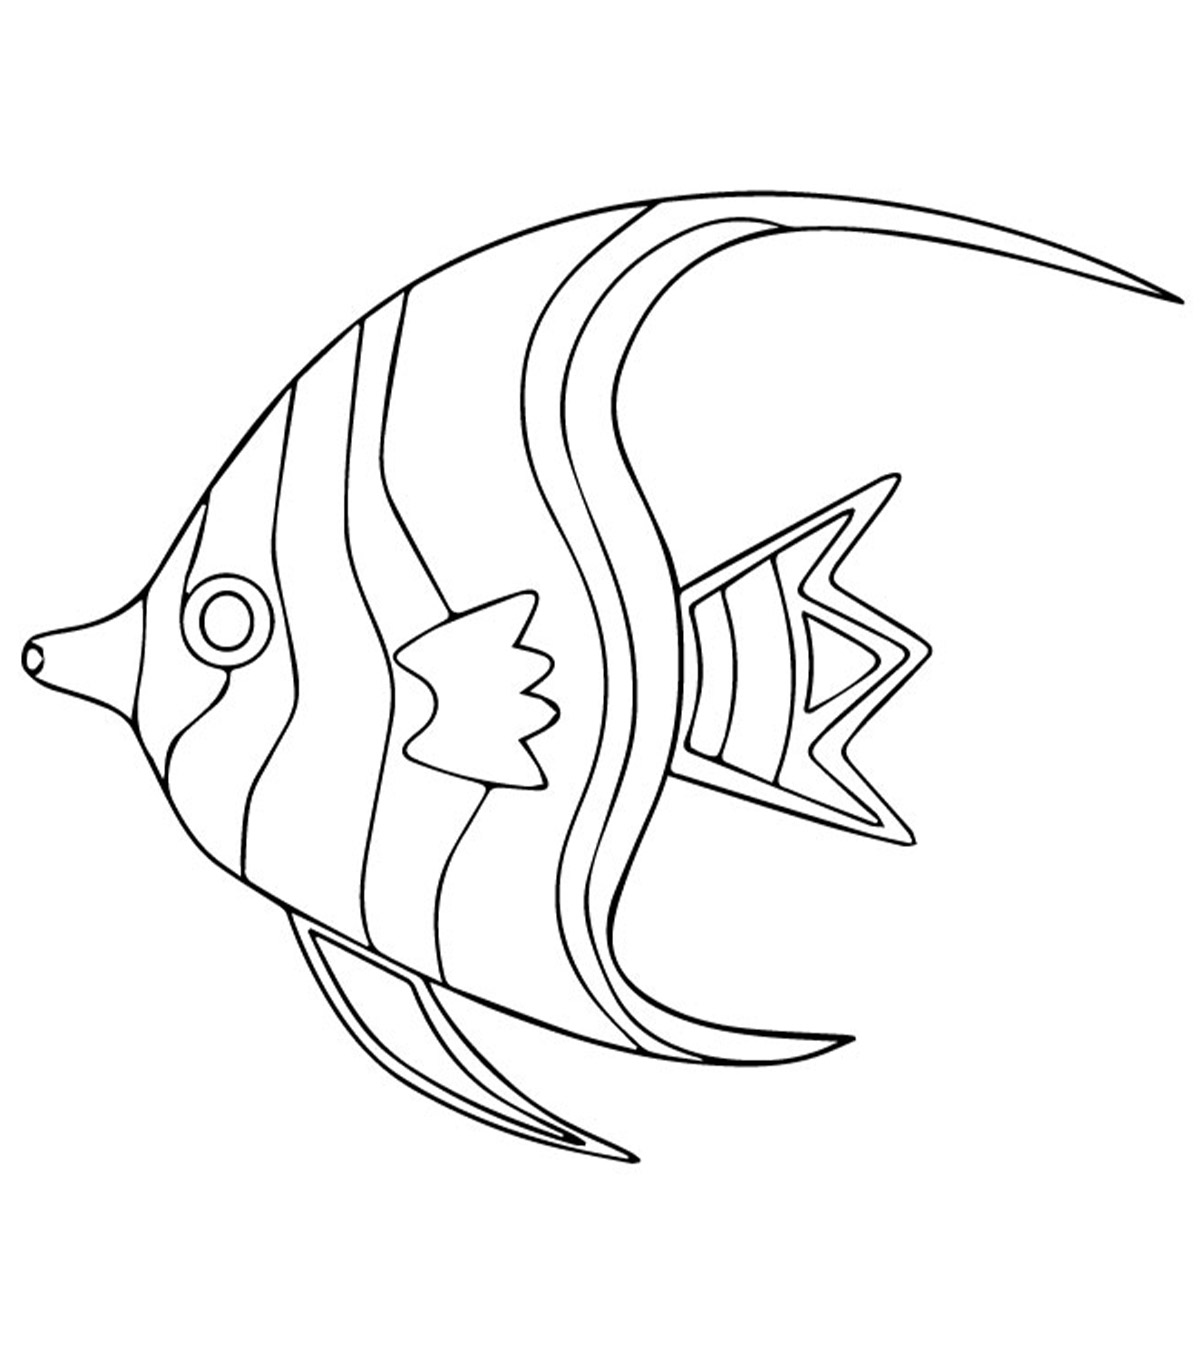 40 Cute Finding Nemo Coloring Pages For Your Little Ones